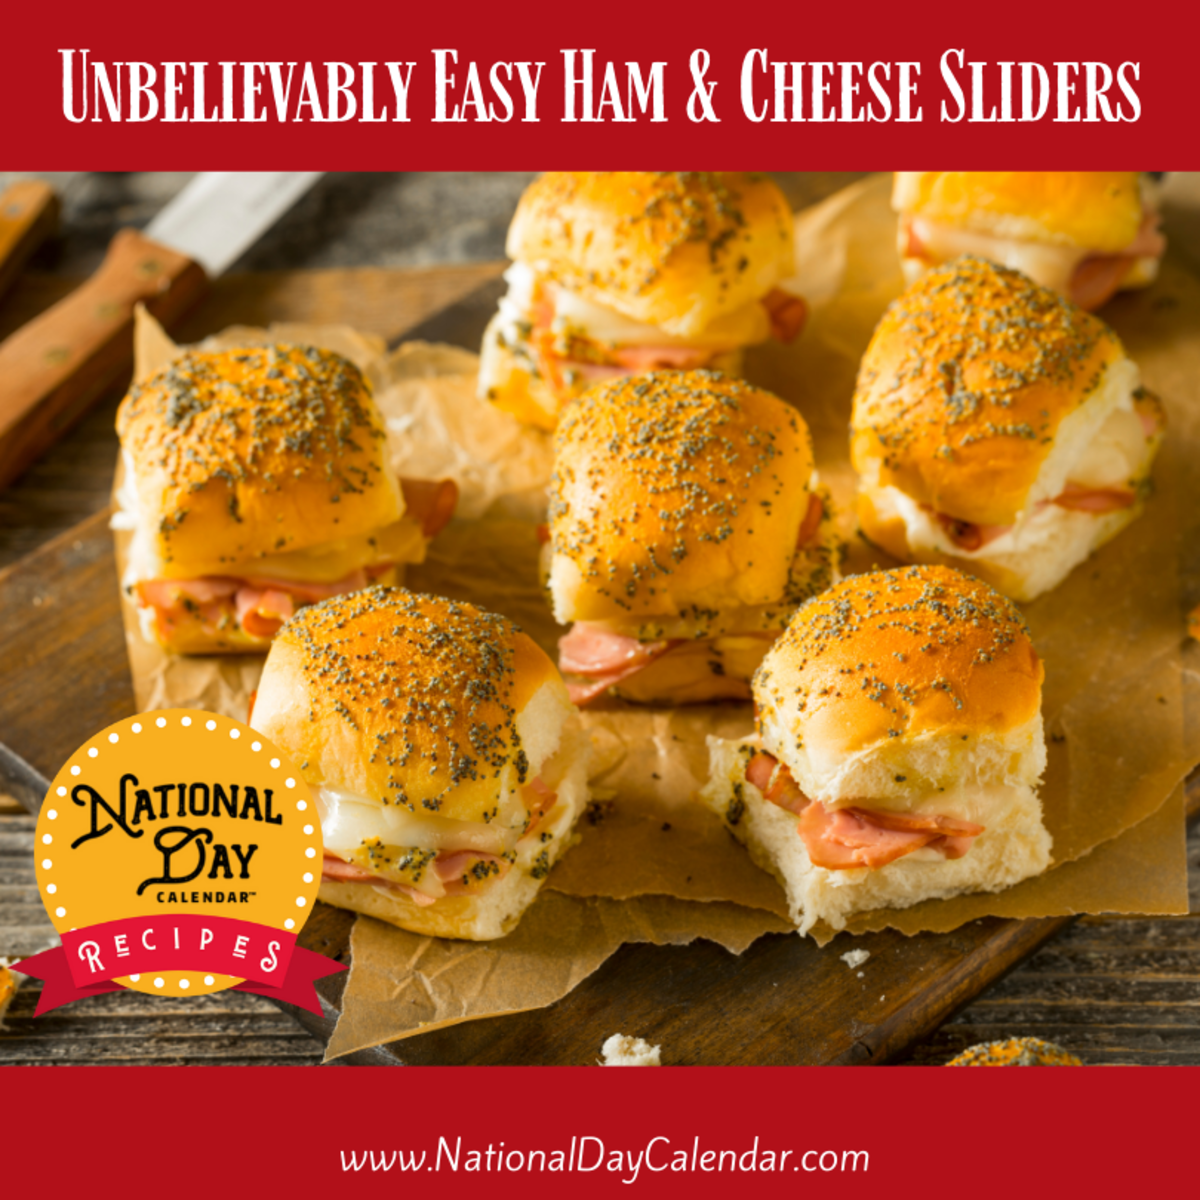 Unbelievably Easy Ham and Cheese Sliders